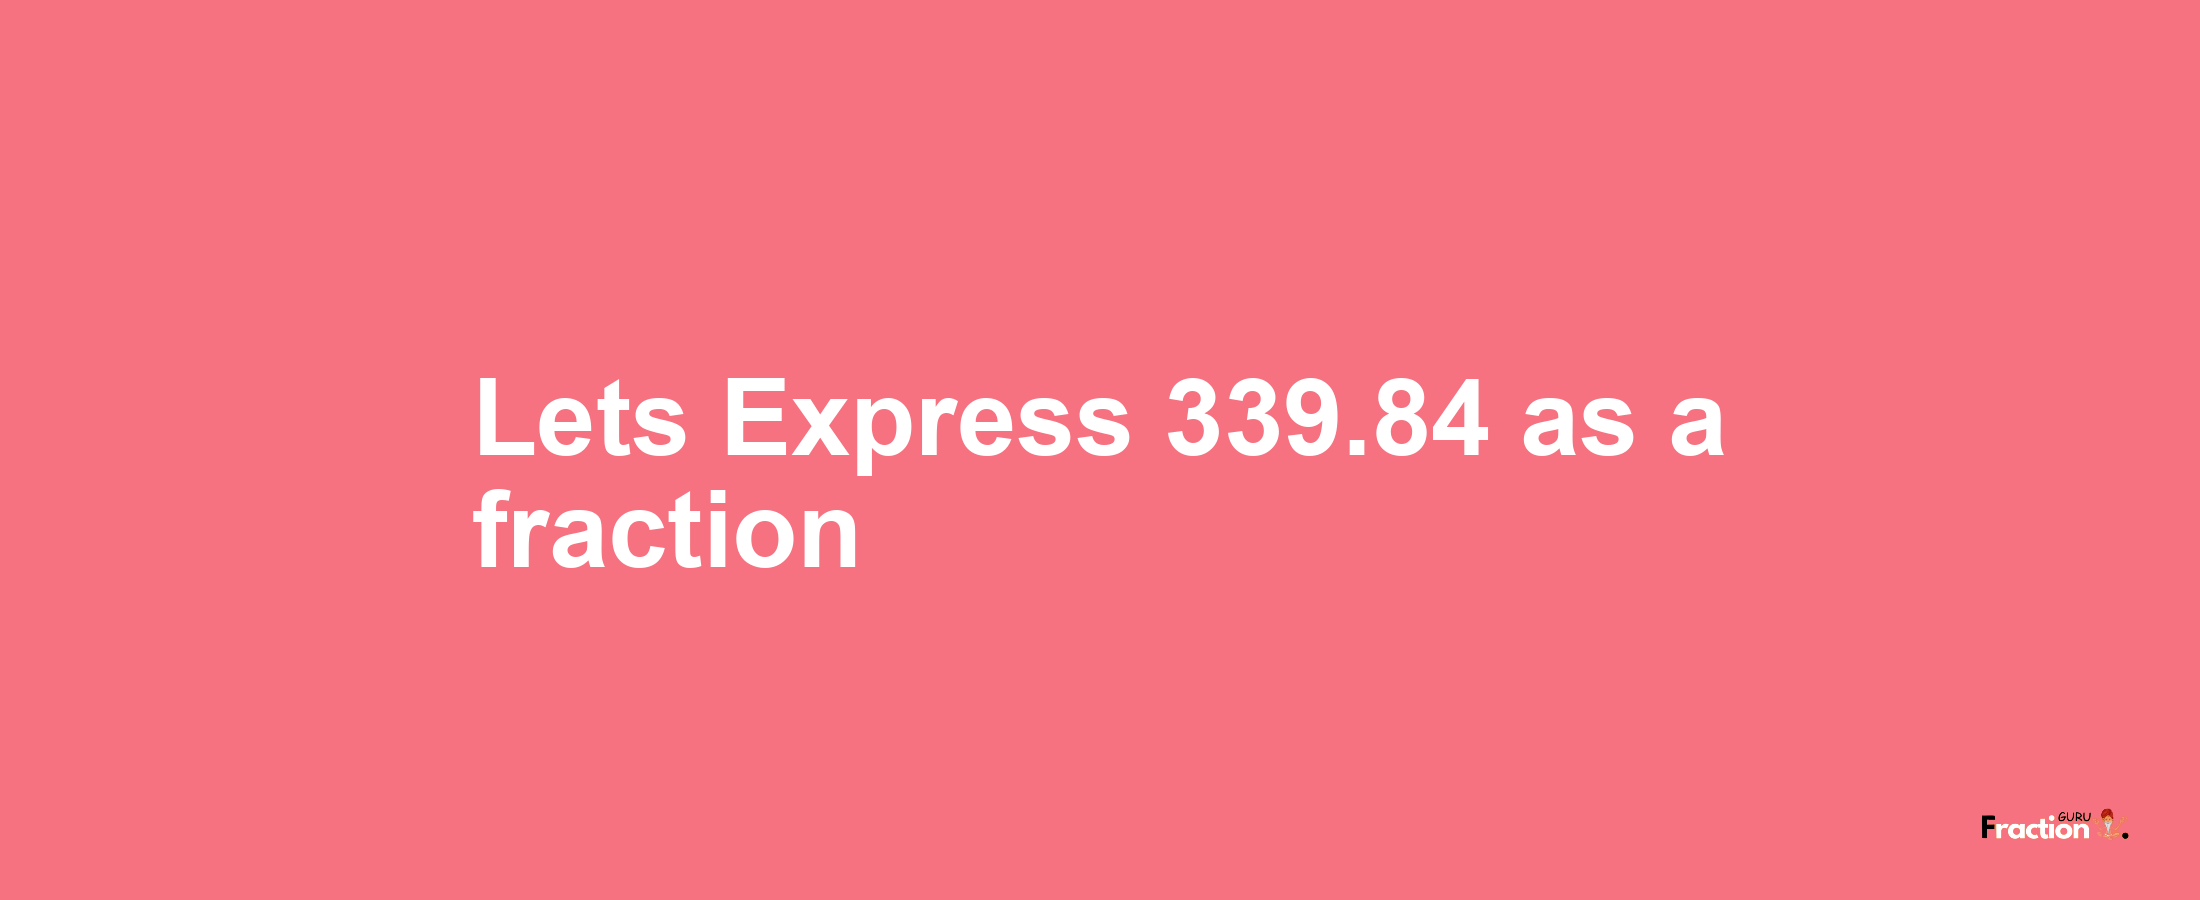 Lets Express 339.84 as afraction